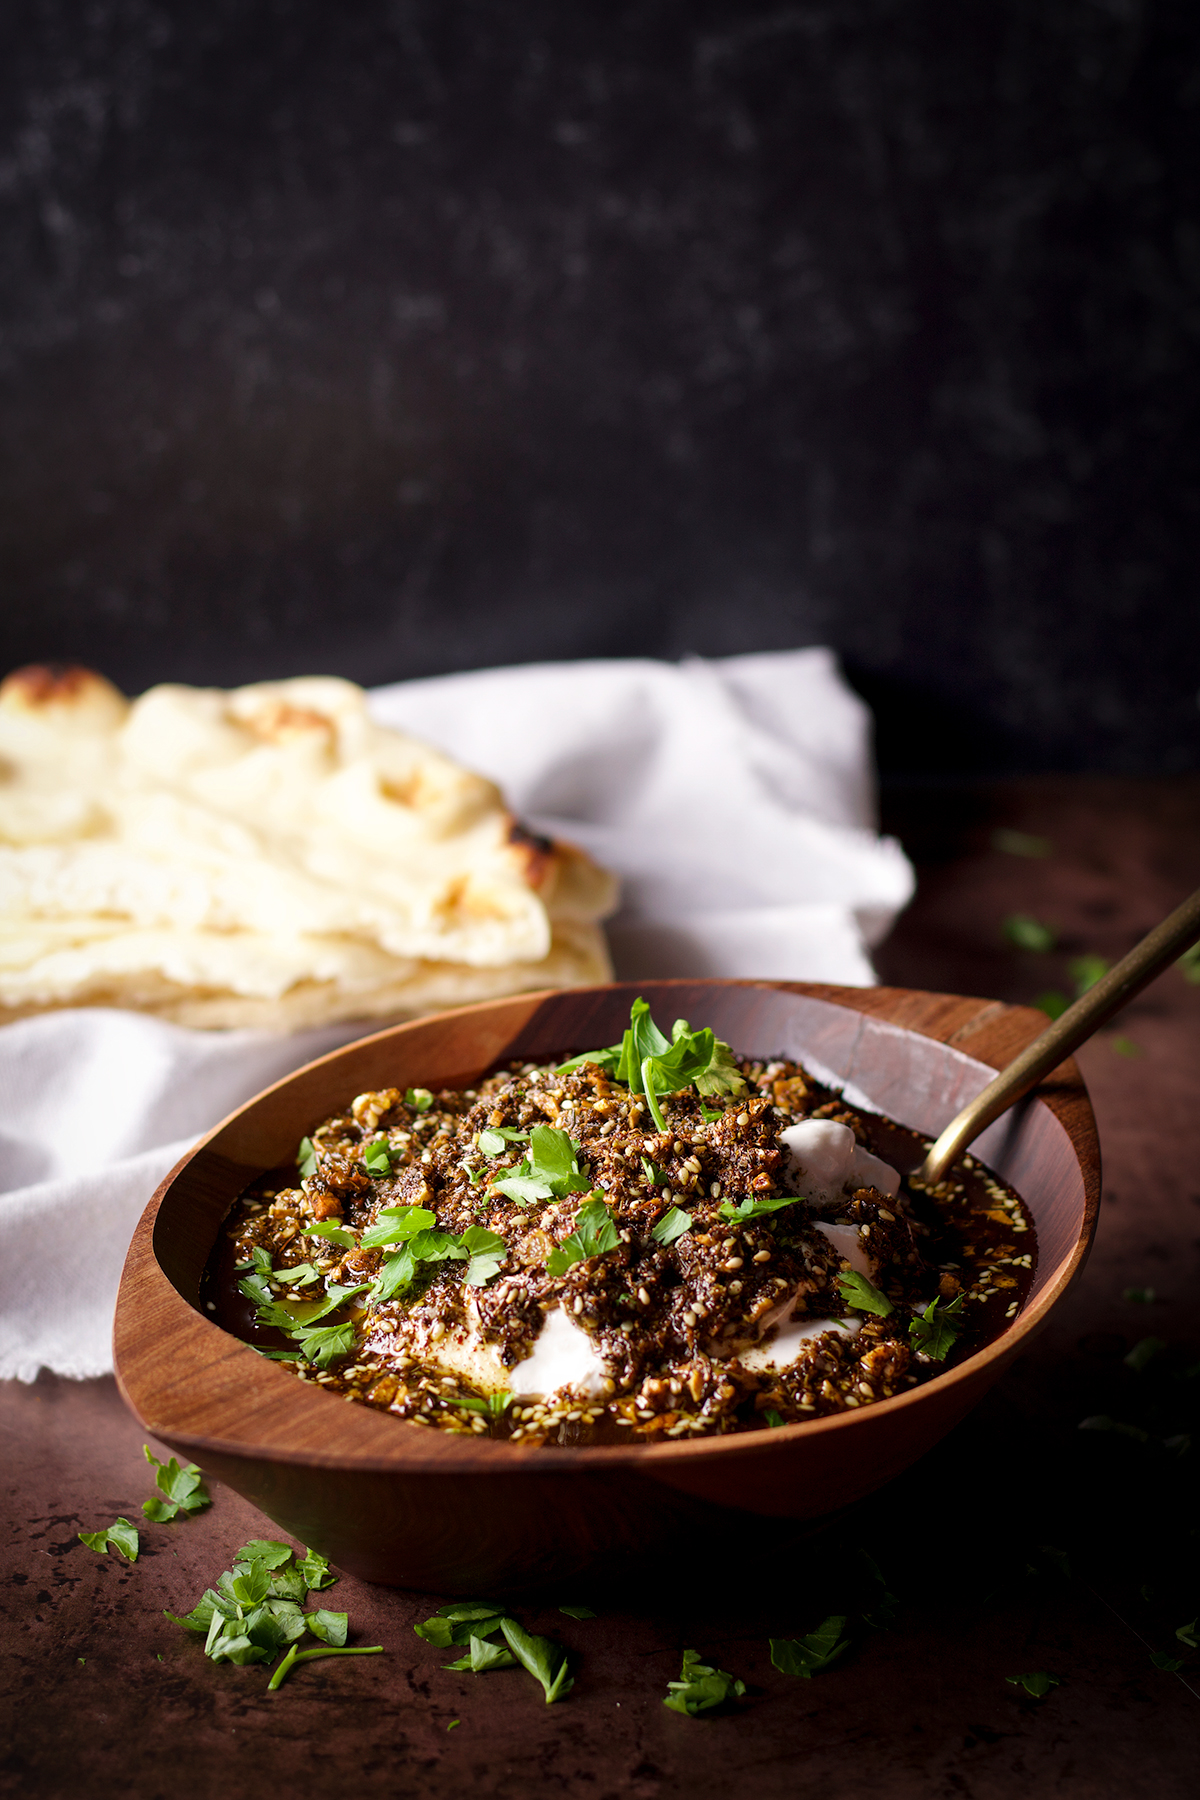 A wood bowl filled with za'atar labneh sitting next to a stack of buttered naan.